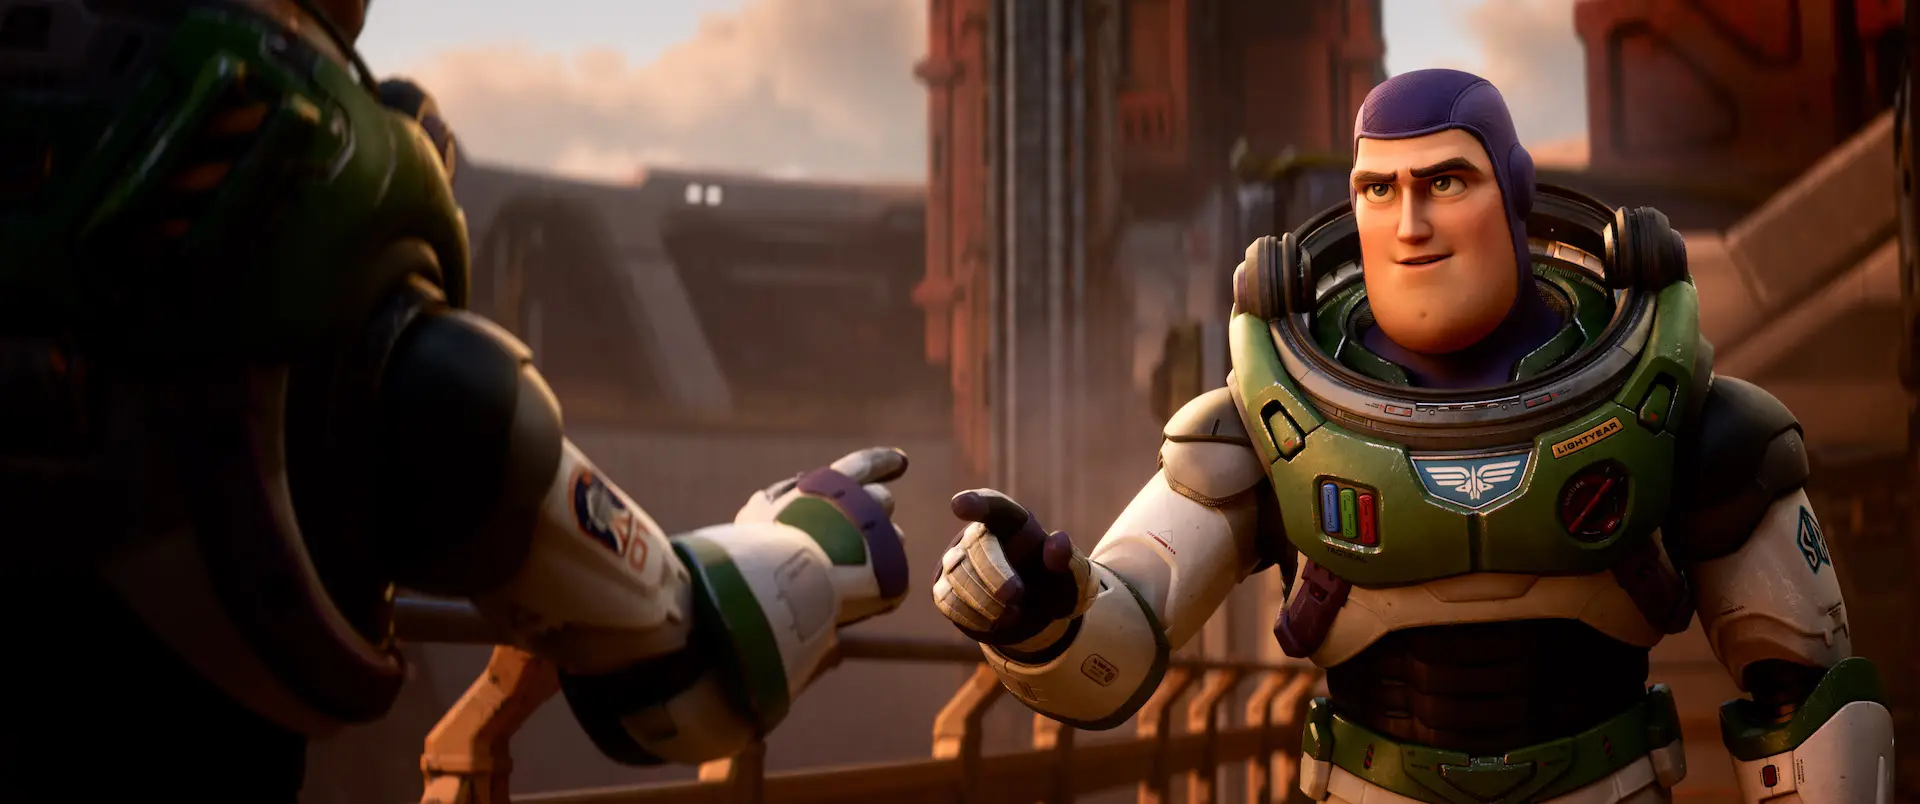 Want to see the movie Lightyear streaming at Disney Plus?